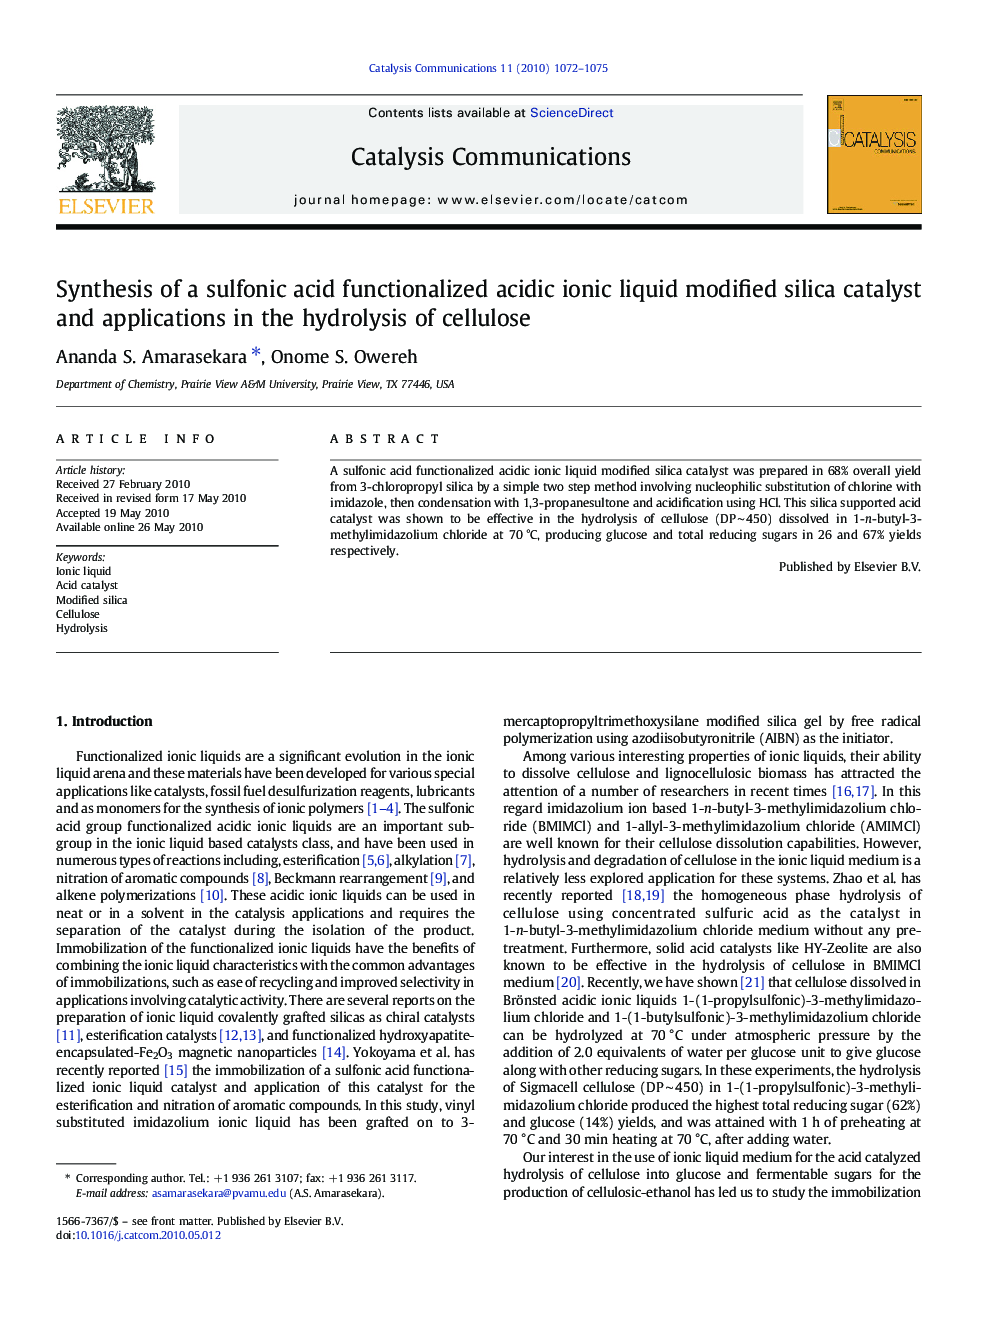 Synthesis of a sulfonic acid functionalized acidic ionic liquid modified silica catalyst and applications in the hydrolysis of cellulose